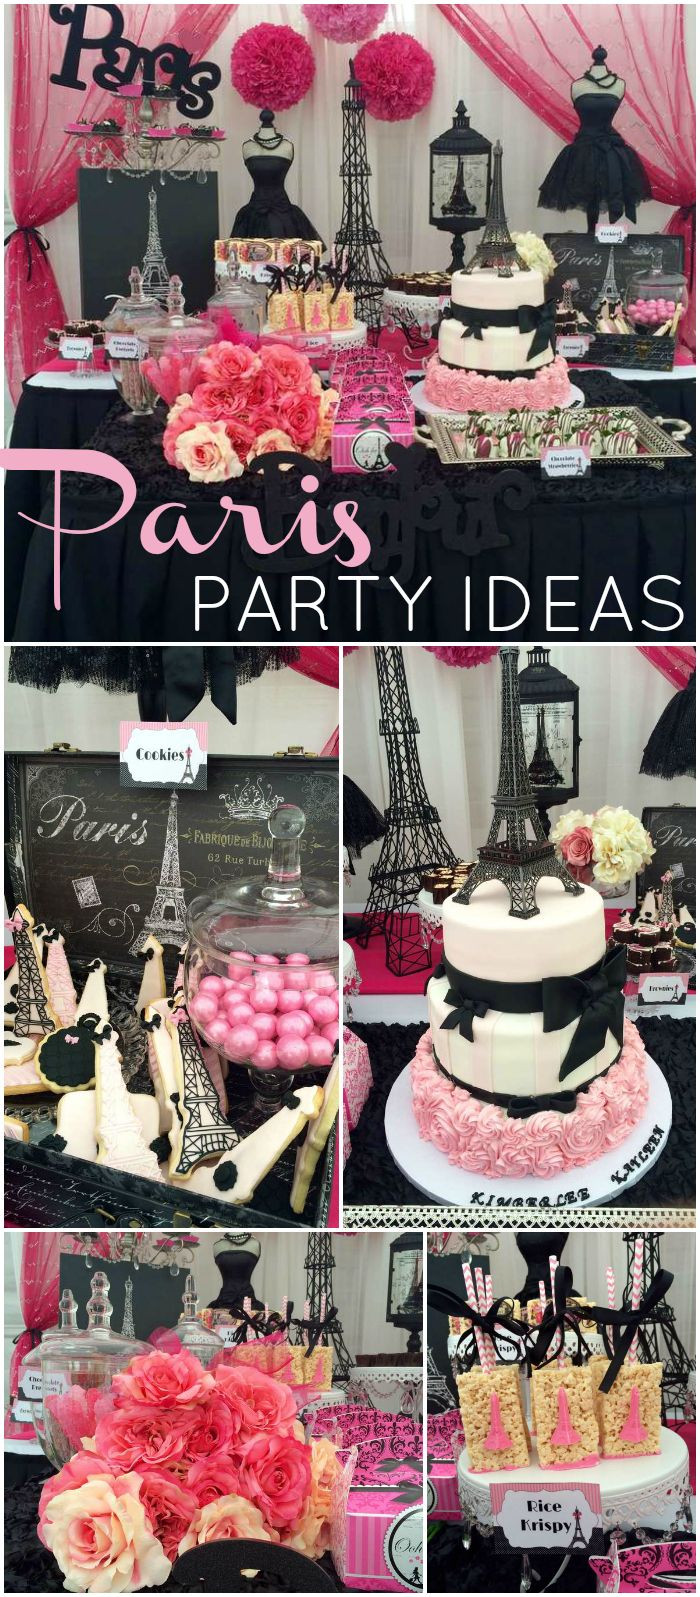 Paris Birthday Party Decorations
 What a gorgeous pink and black Paris birthday party See